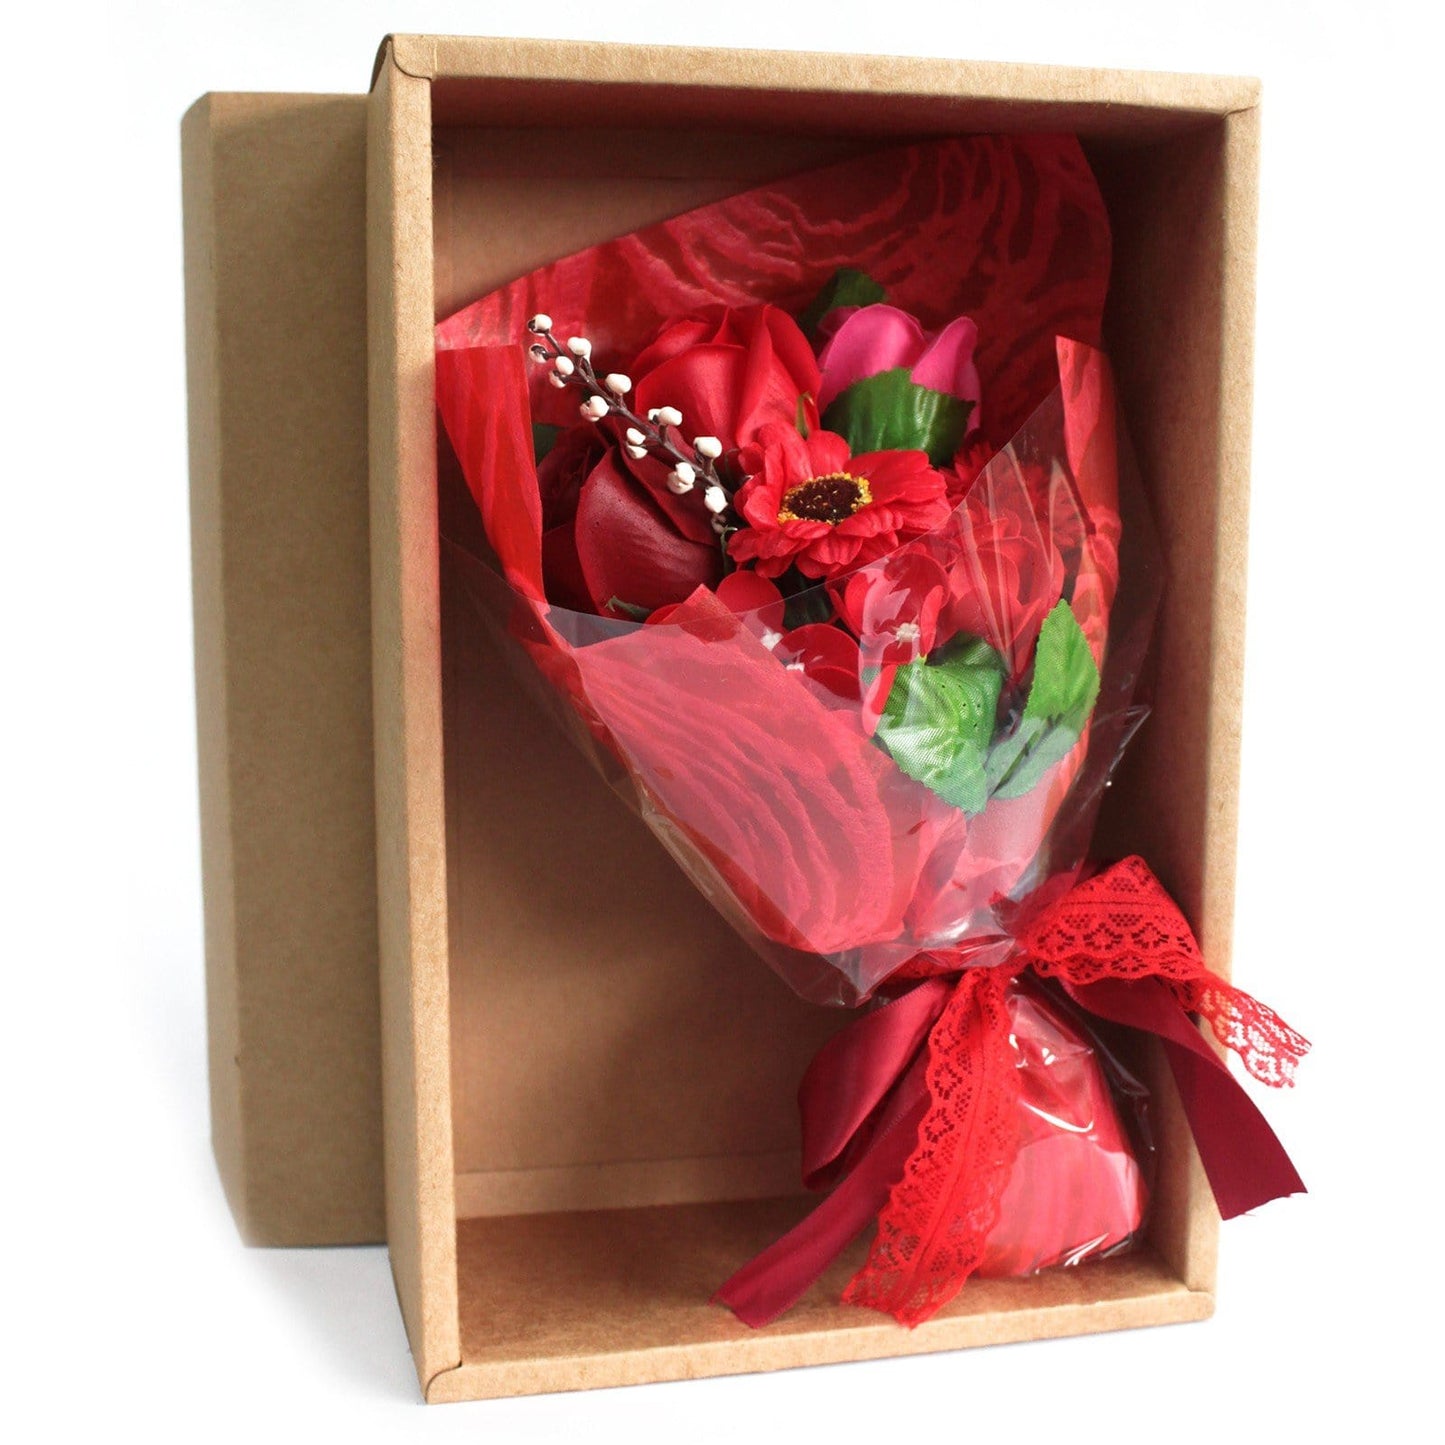 Boxed Hand Soap Flower Bouquets - ShopGreenToday